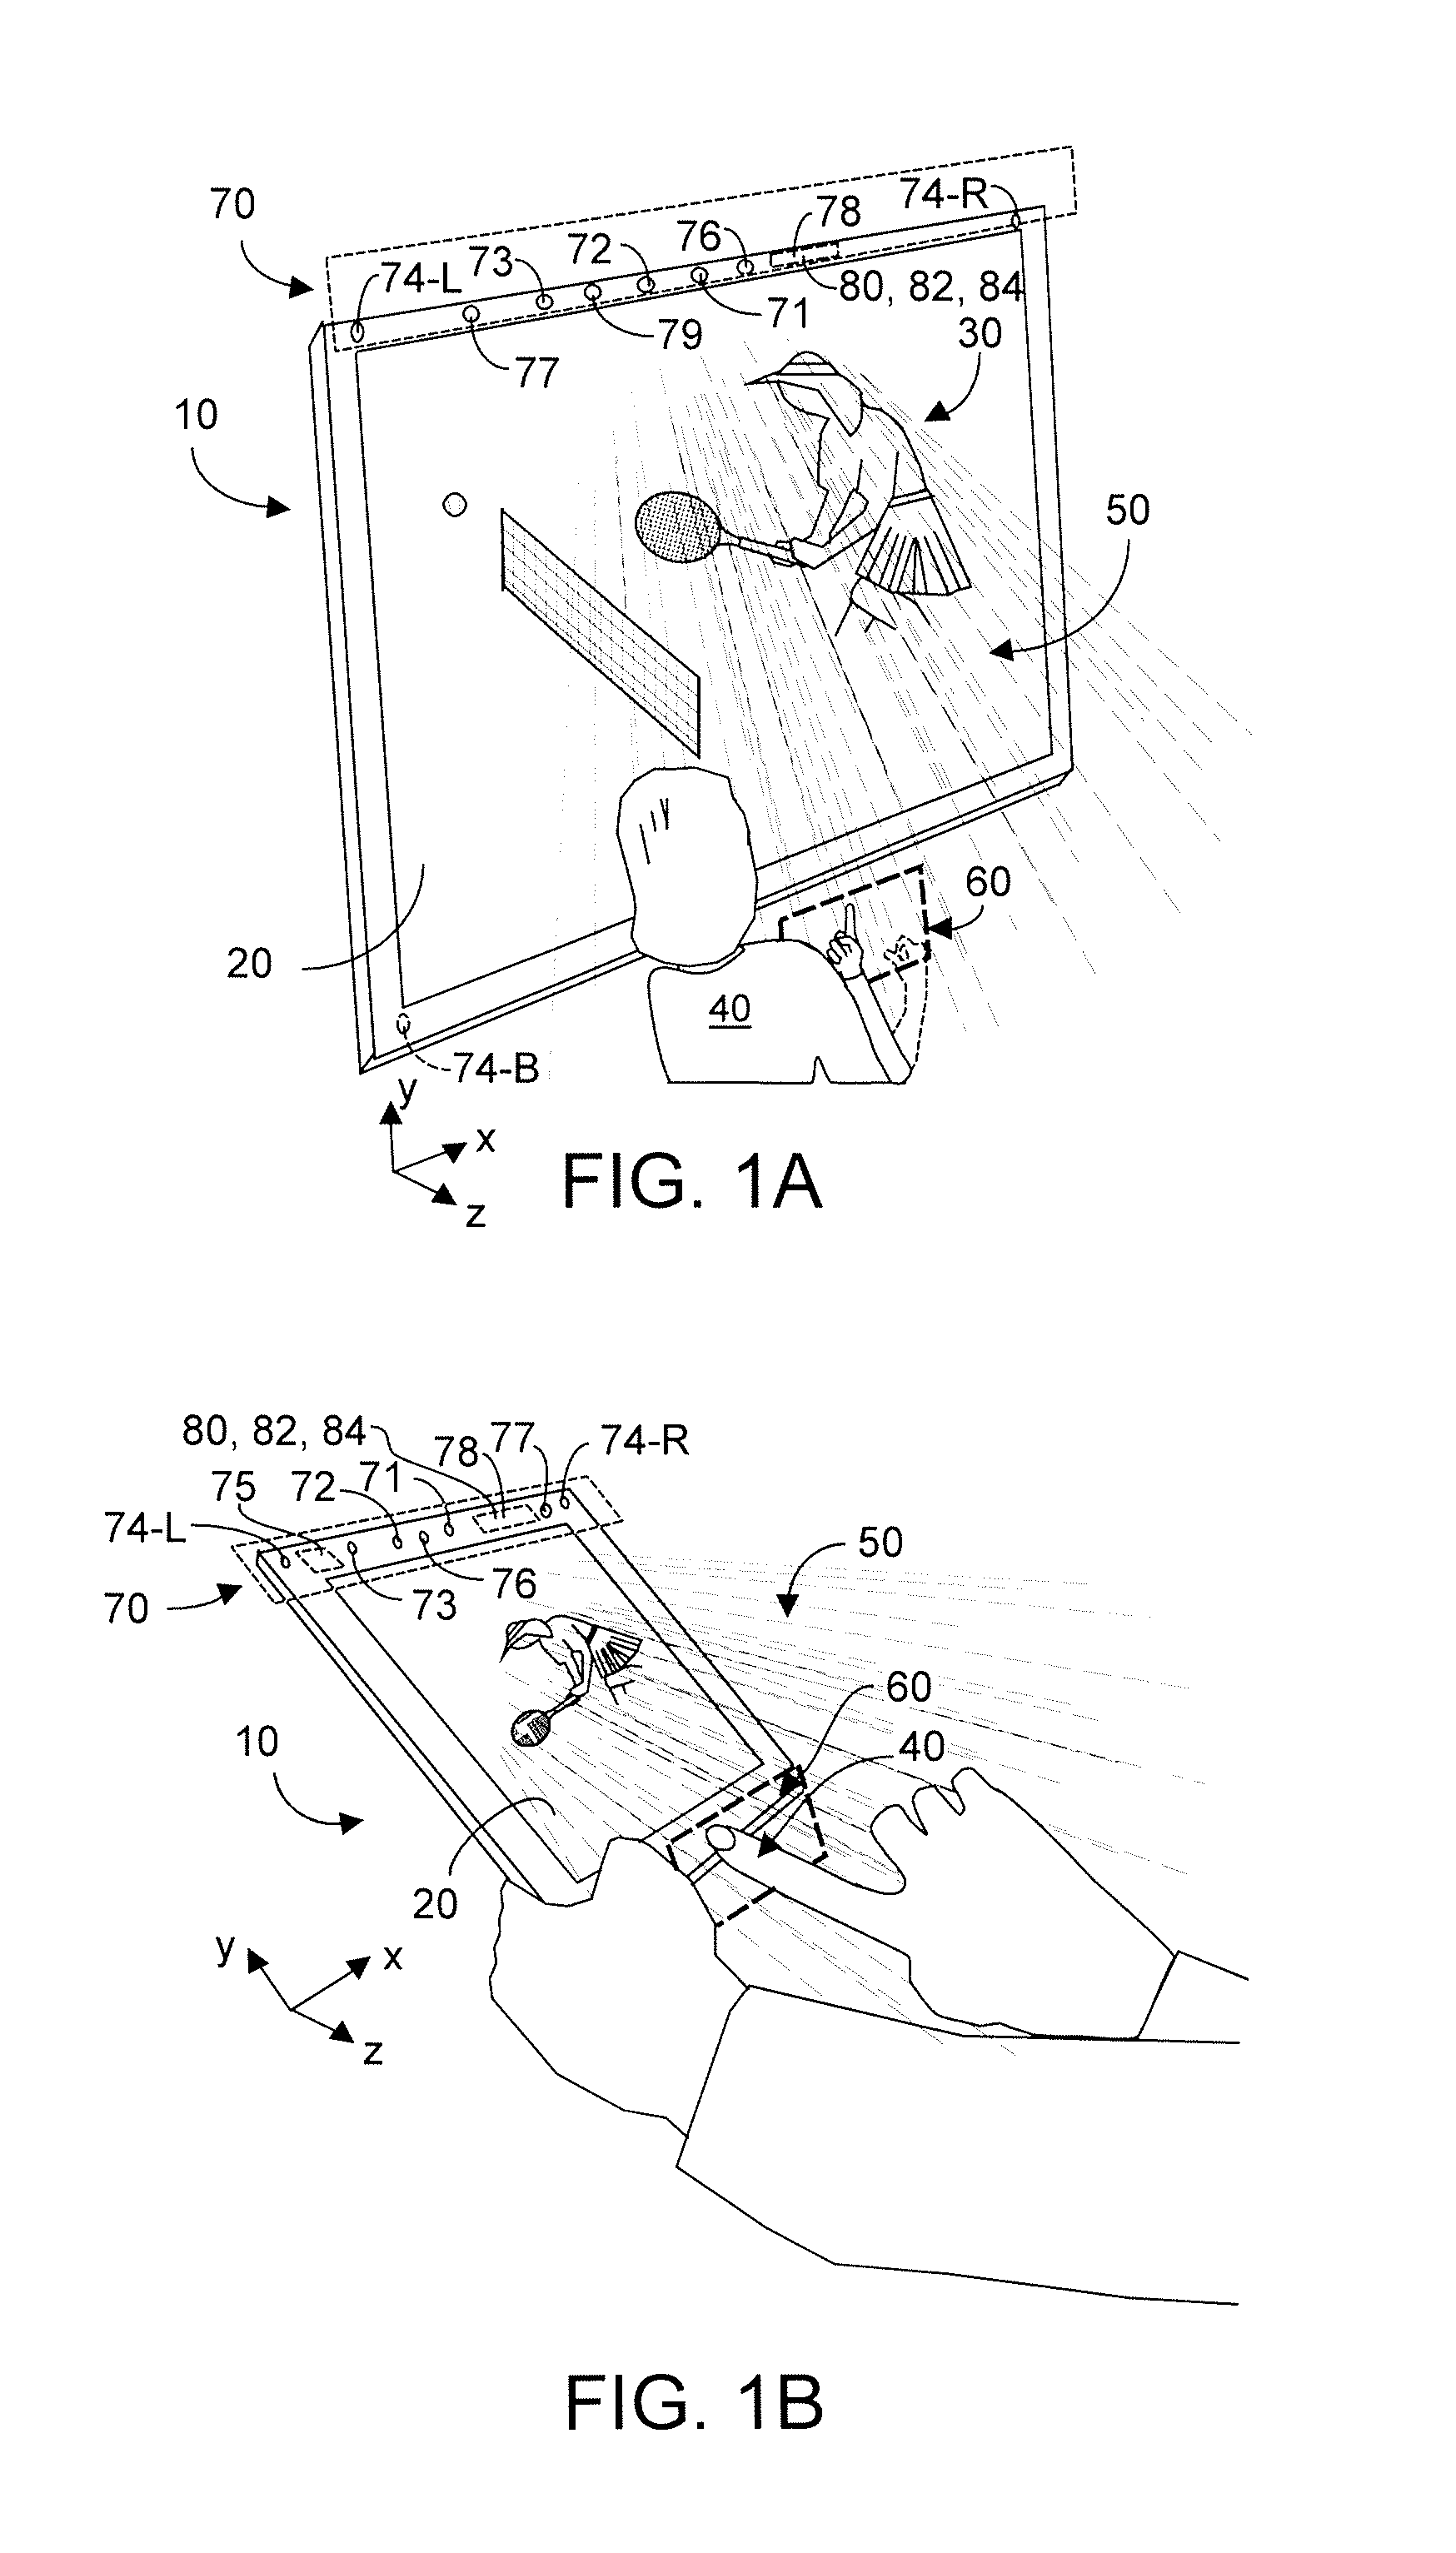 Method and system enabling natural user interface gestures with an electronic system